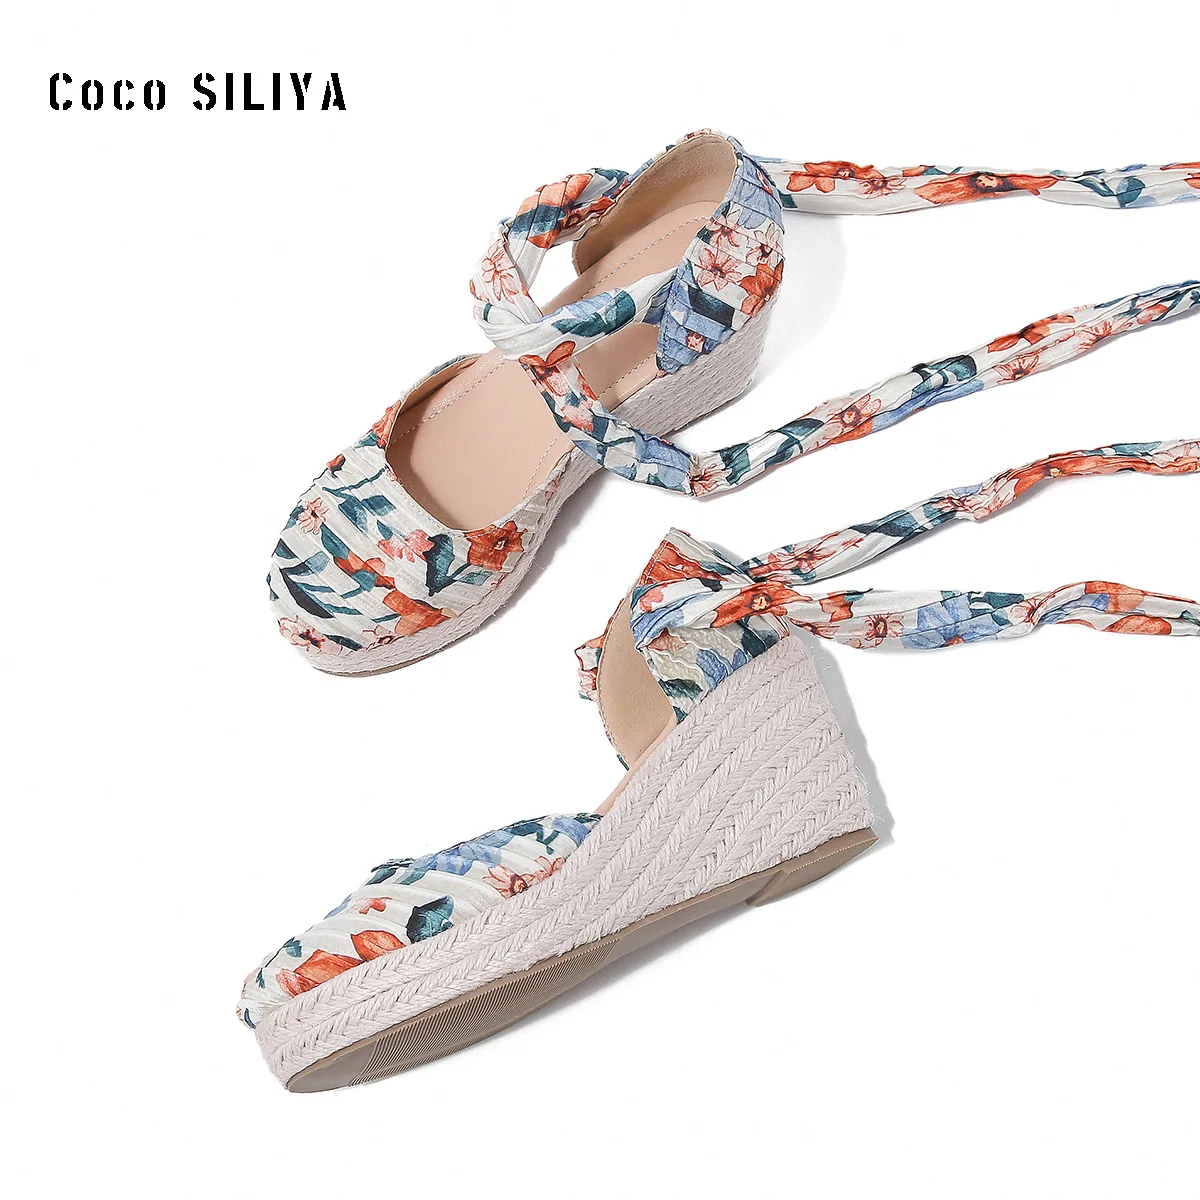 

Woman Shoes for Women 2023 Women's Sandal Free Shipping Promotion Ladies Shoes on Offer Sandals Heels Summer Traf Espadrilles